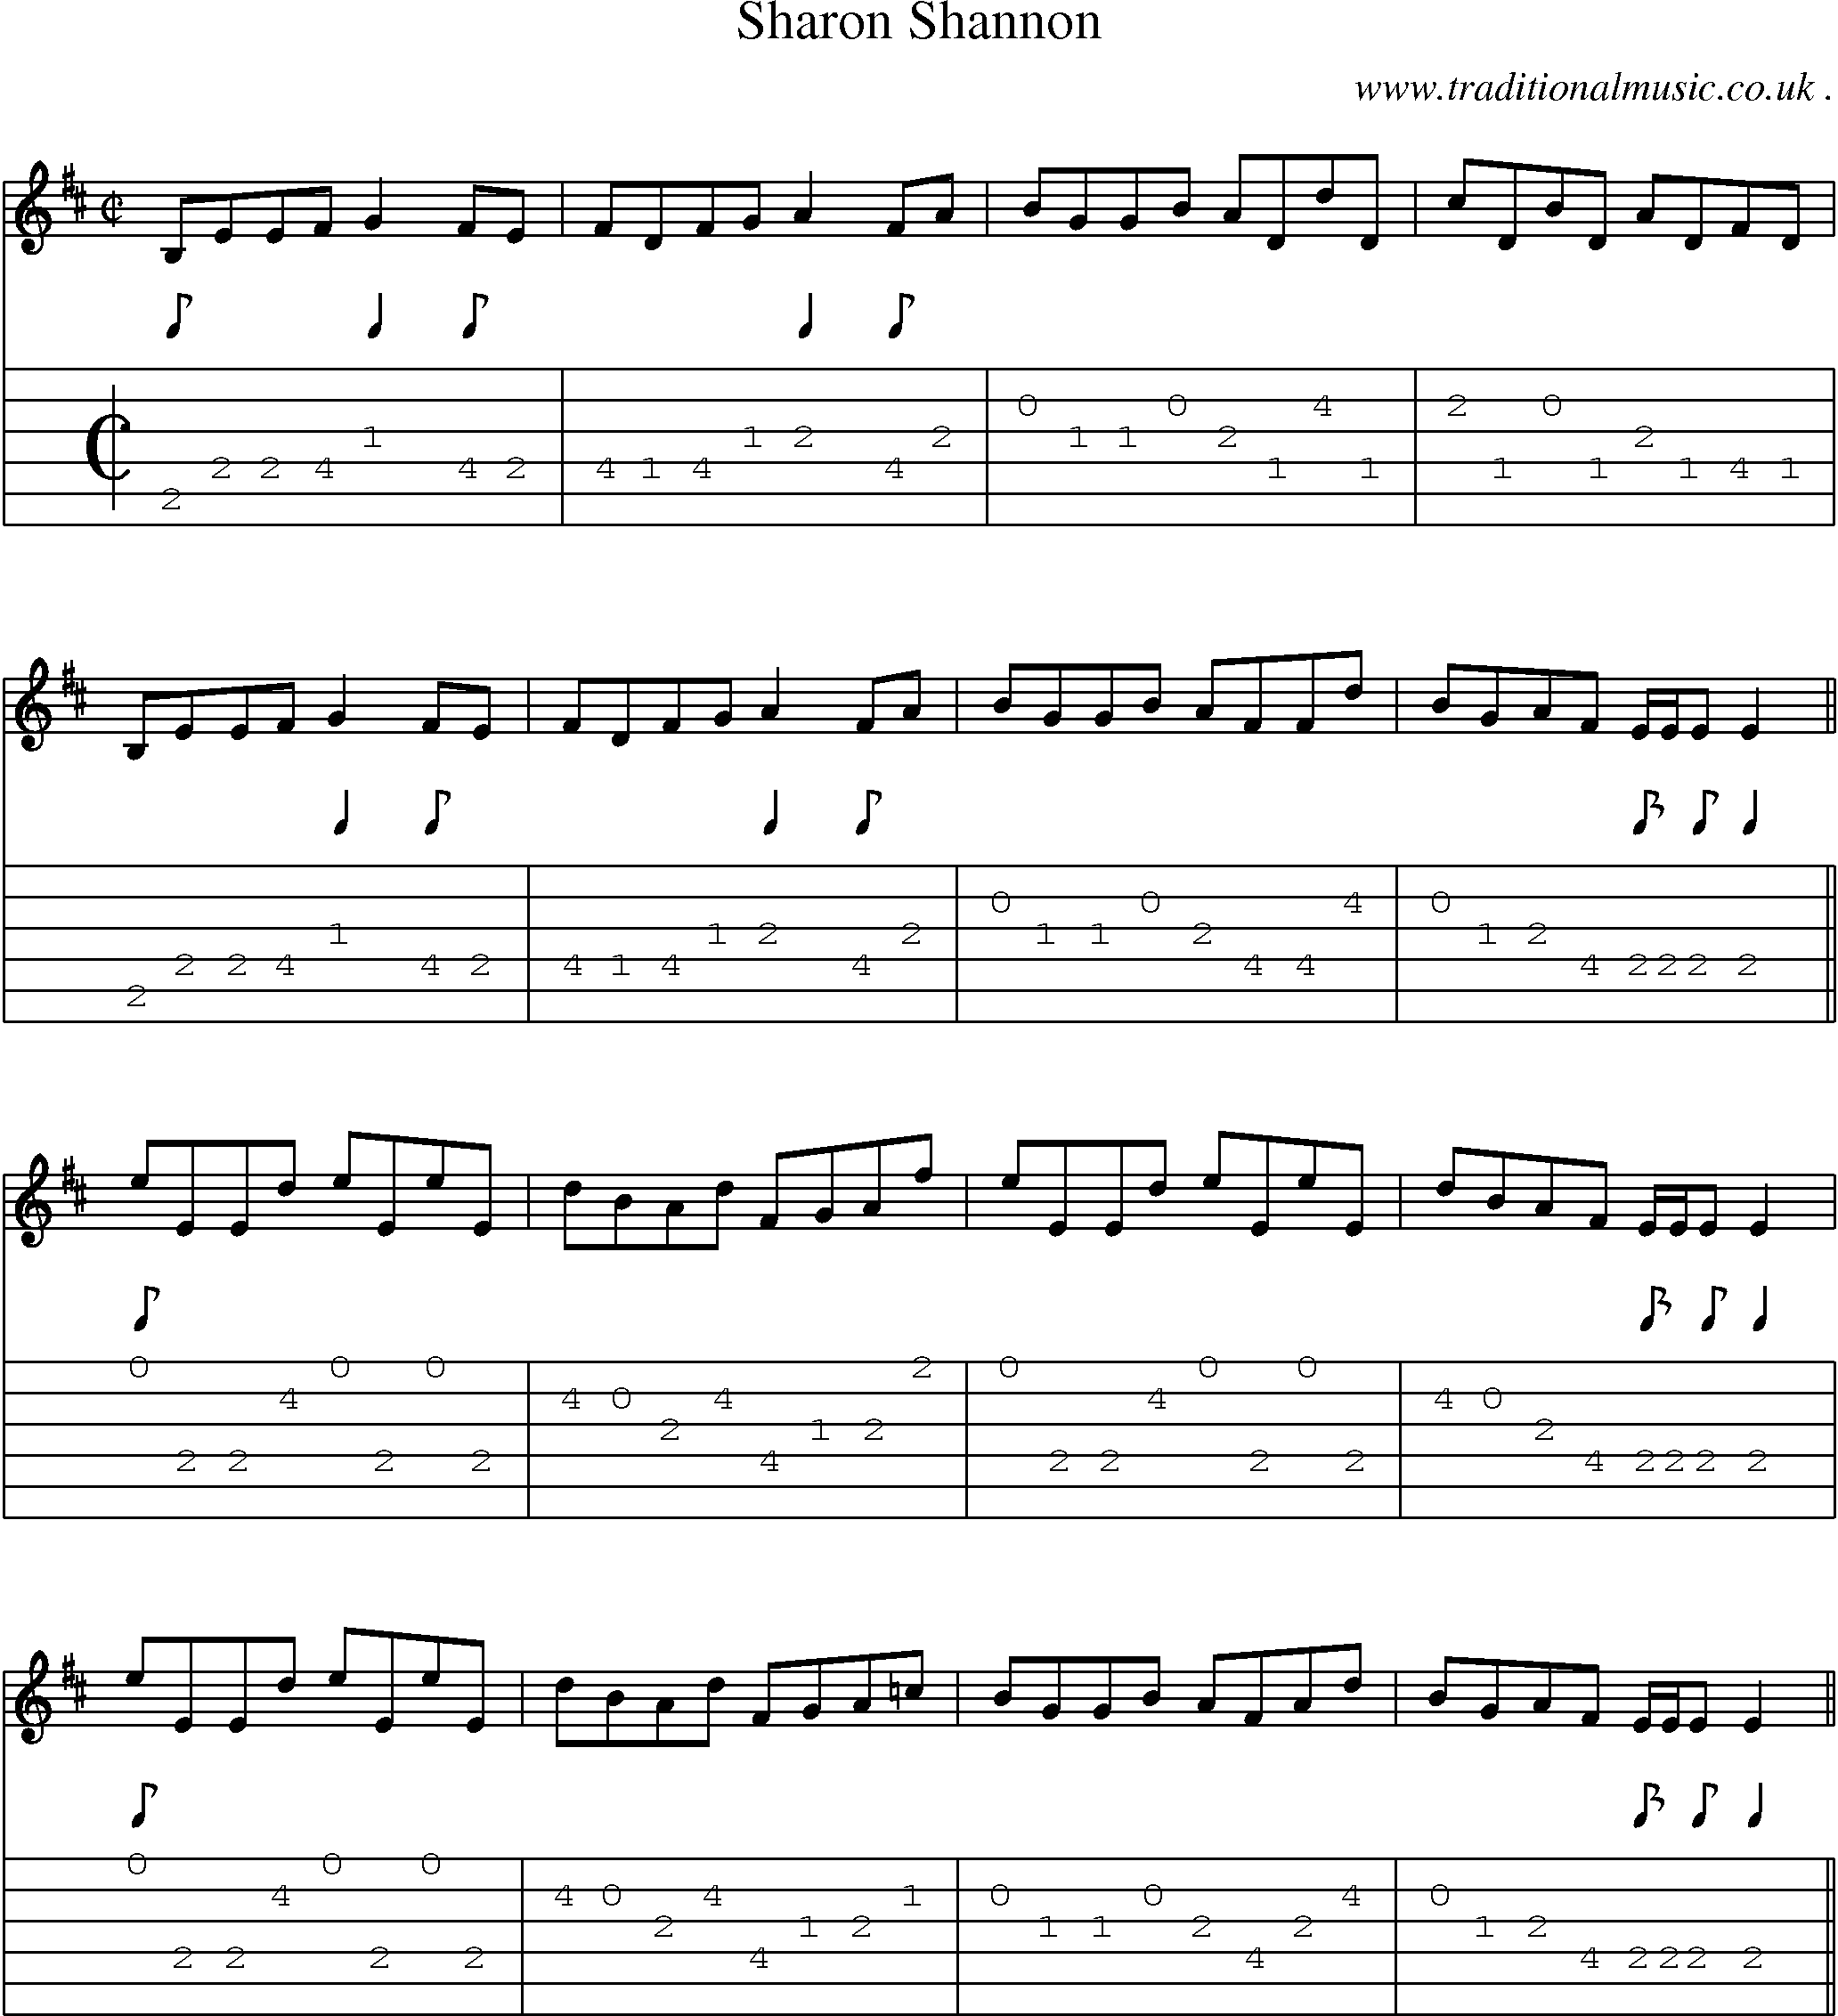 Sheet-Music and Guitar Tabs for Sharon Shannon